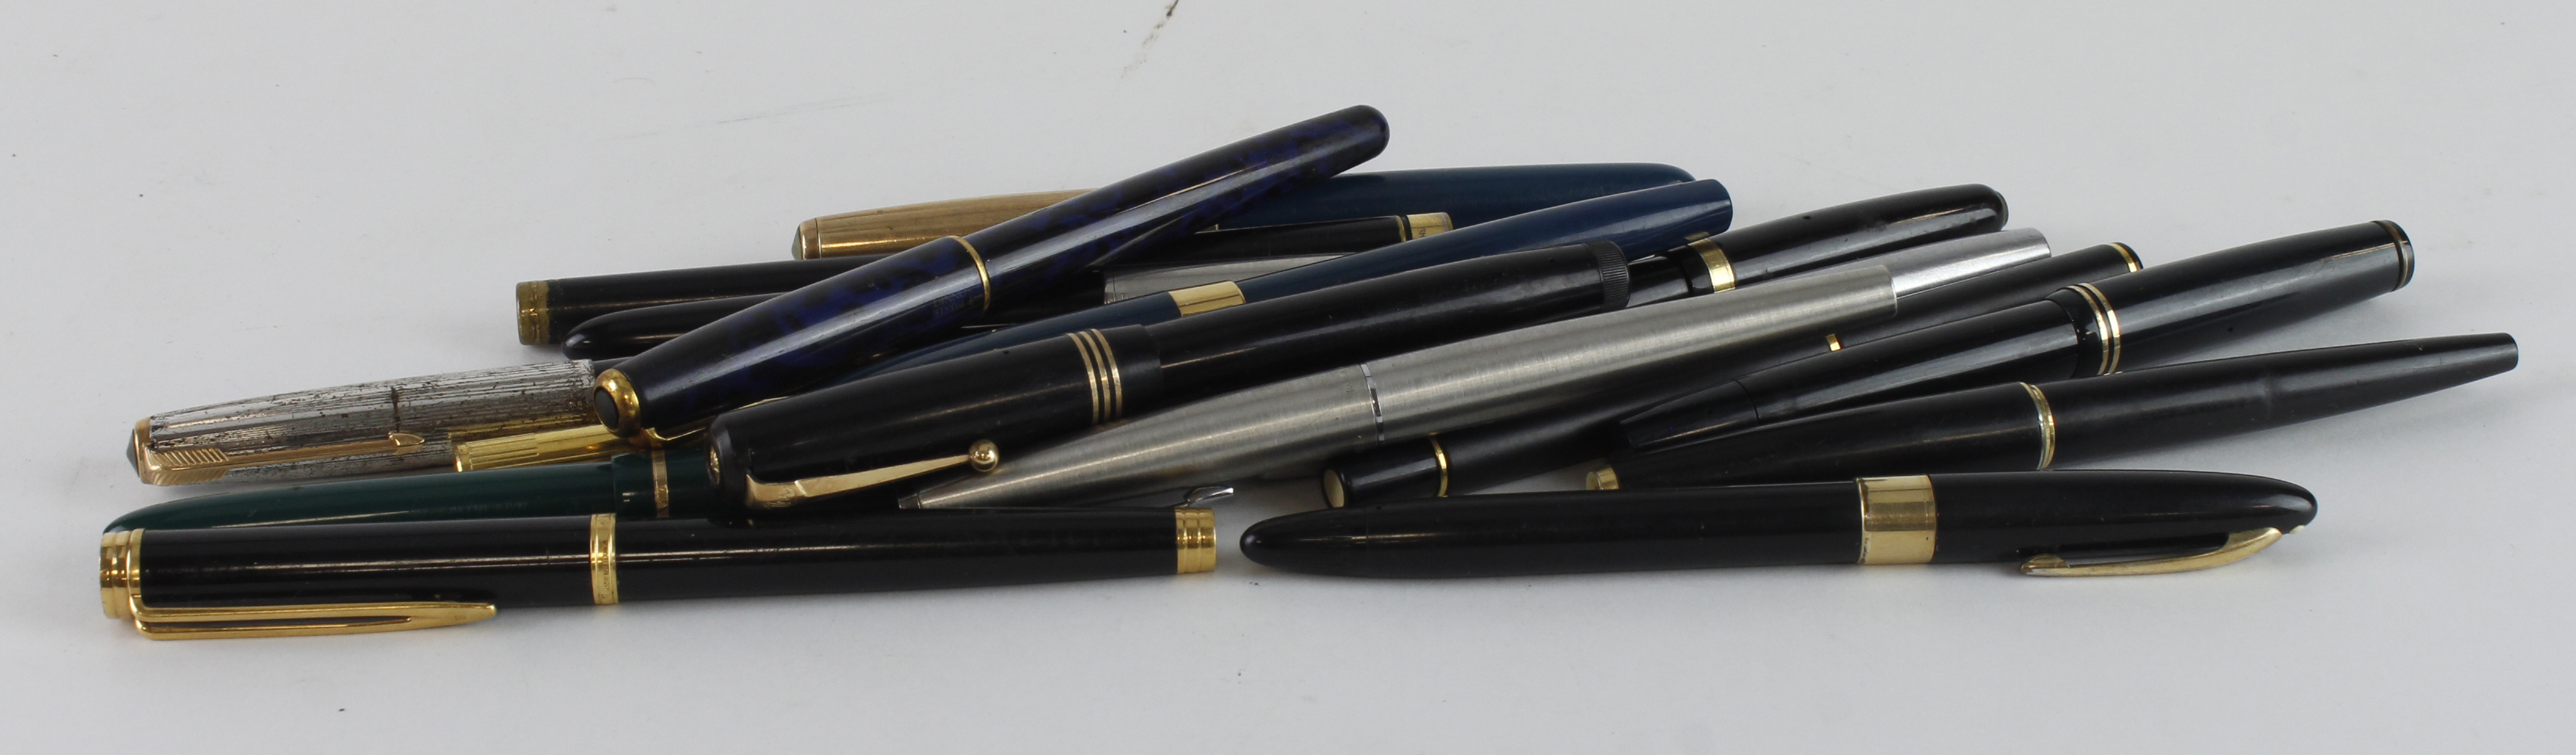 Pens. A collection of seventeen fountain pens, including Parker (incl. Victory, 51), Sheaffer,